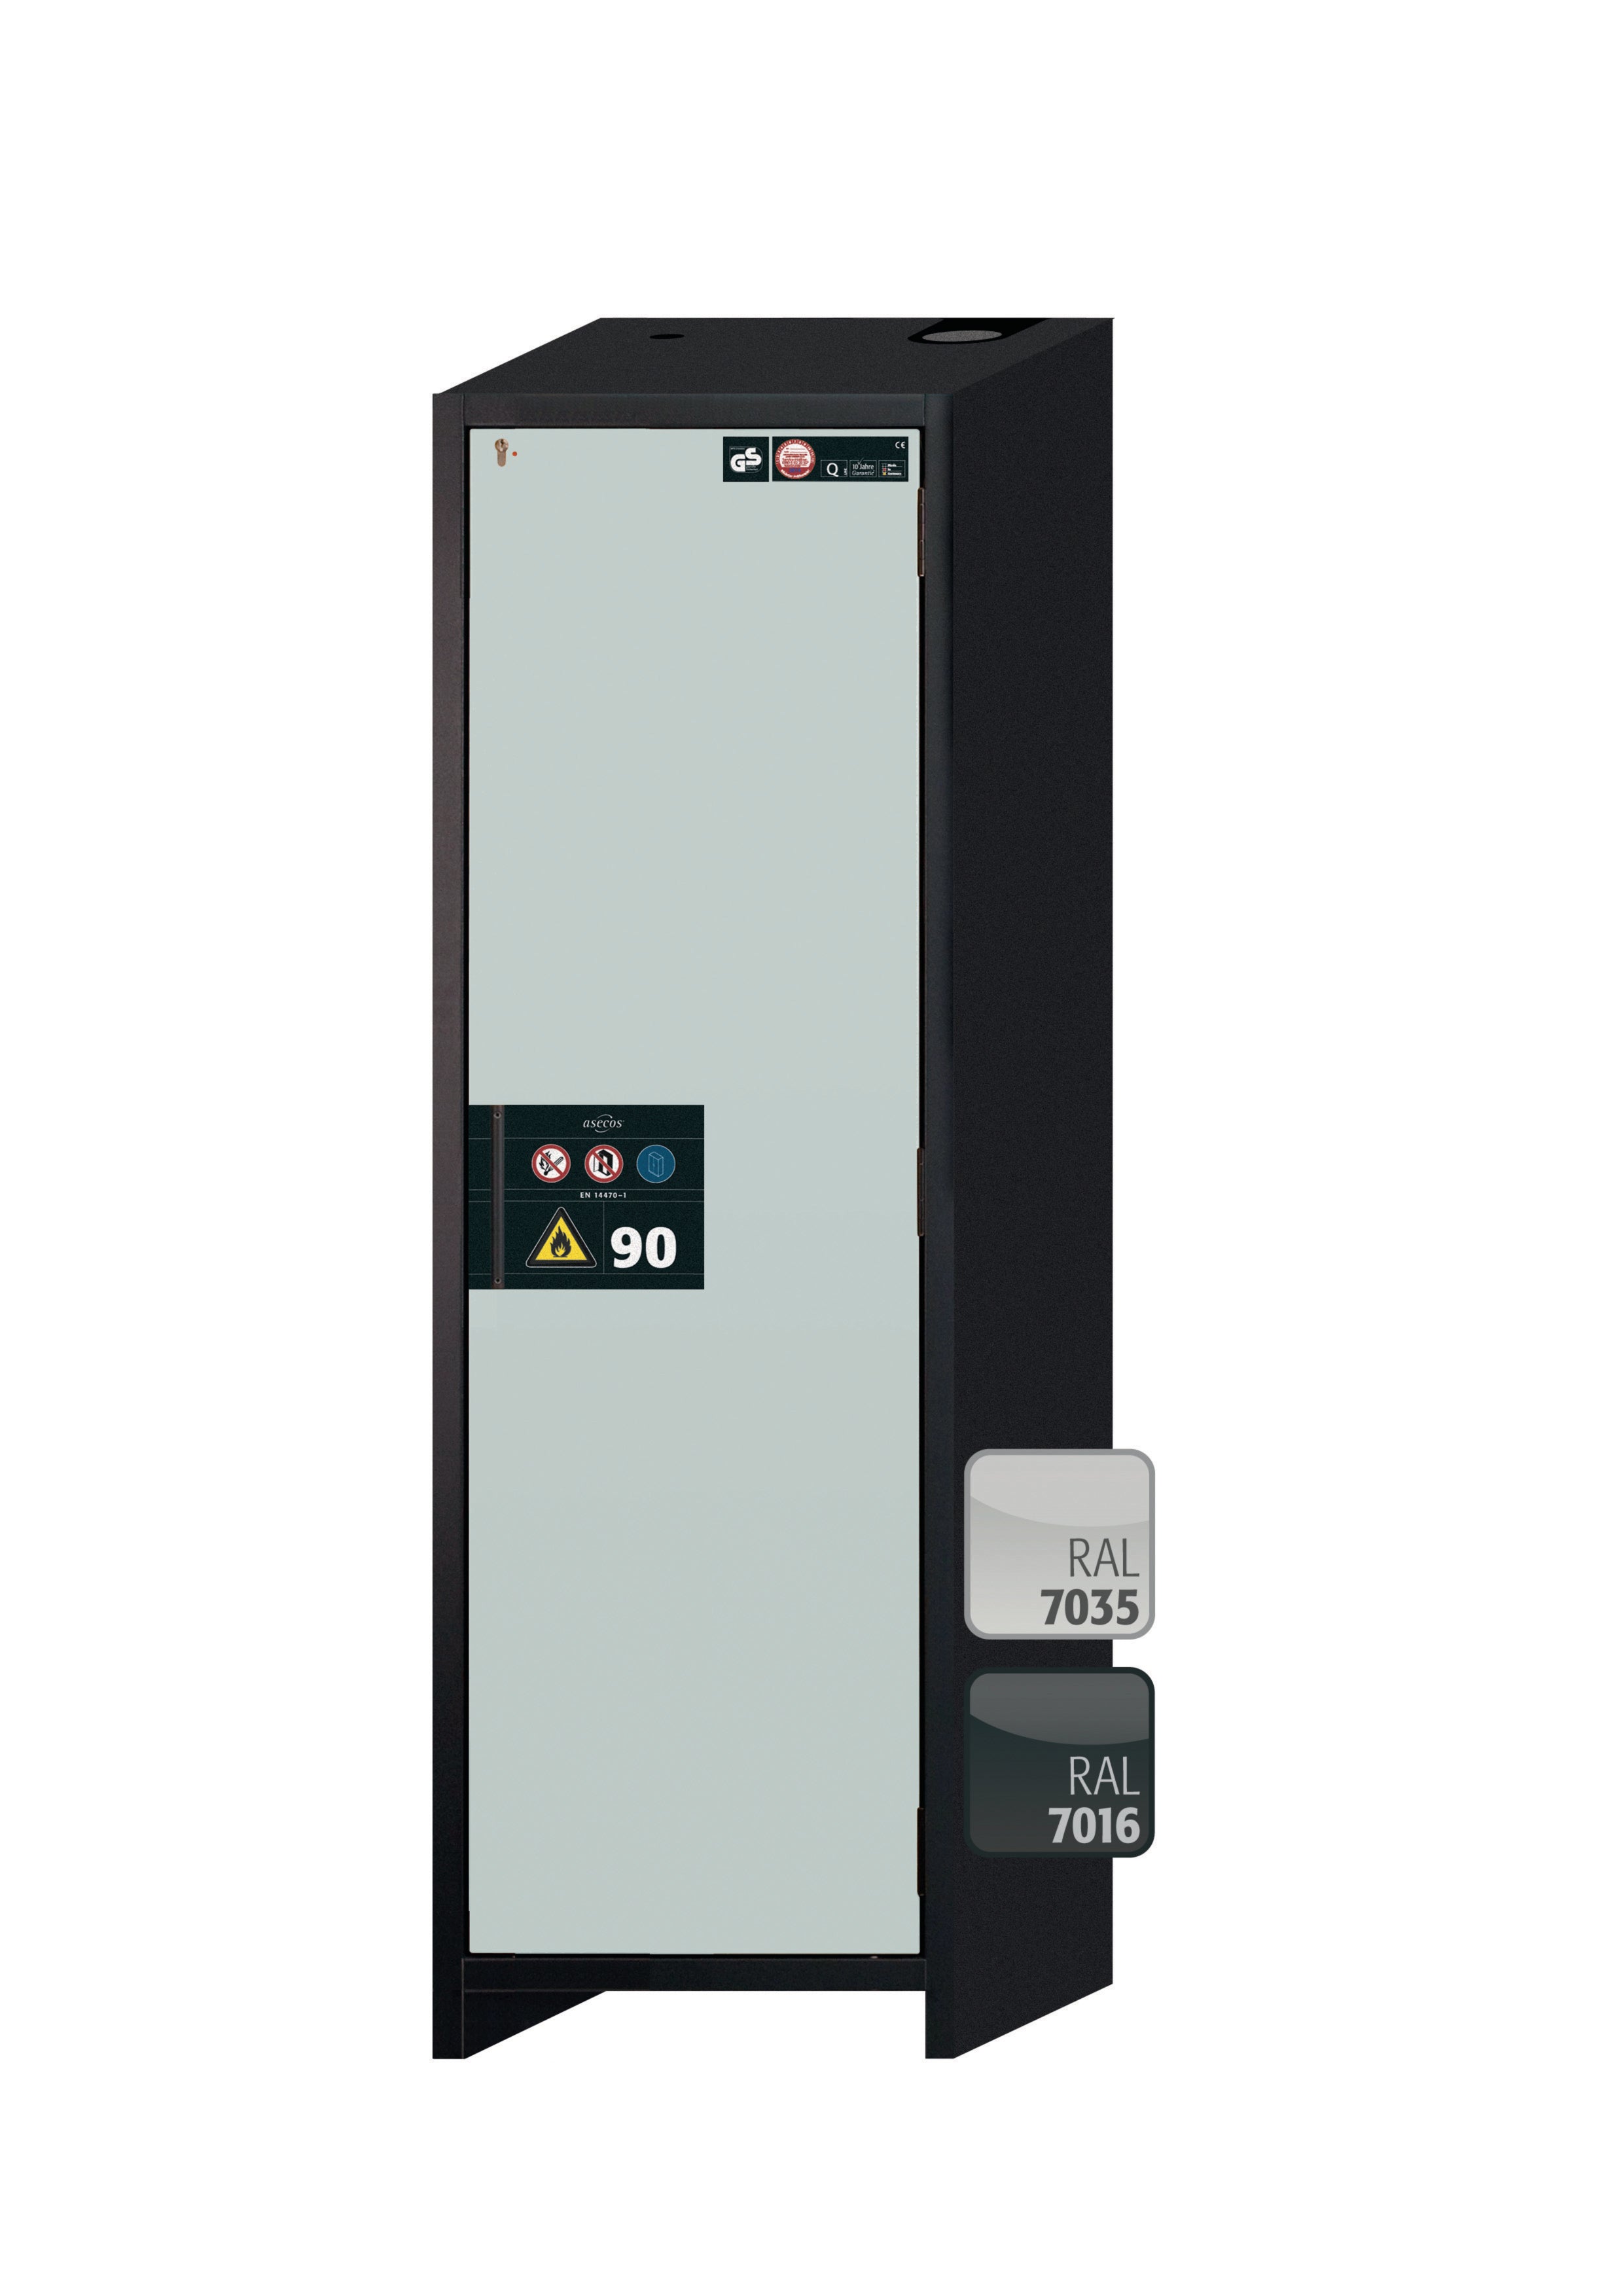 Type 90 safety storage cabinet Q-CLASSIC-90 model Q90.195.060.R in light grey RAL 7035 with 2x shelf standard (stainless steel 1.4301),